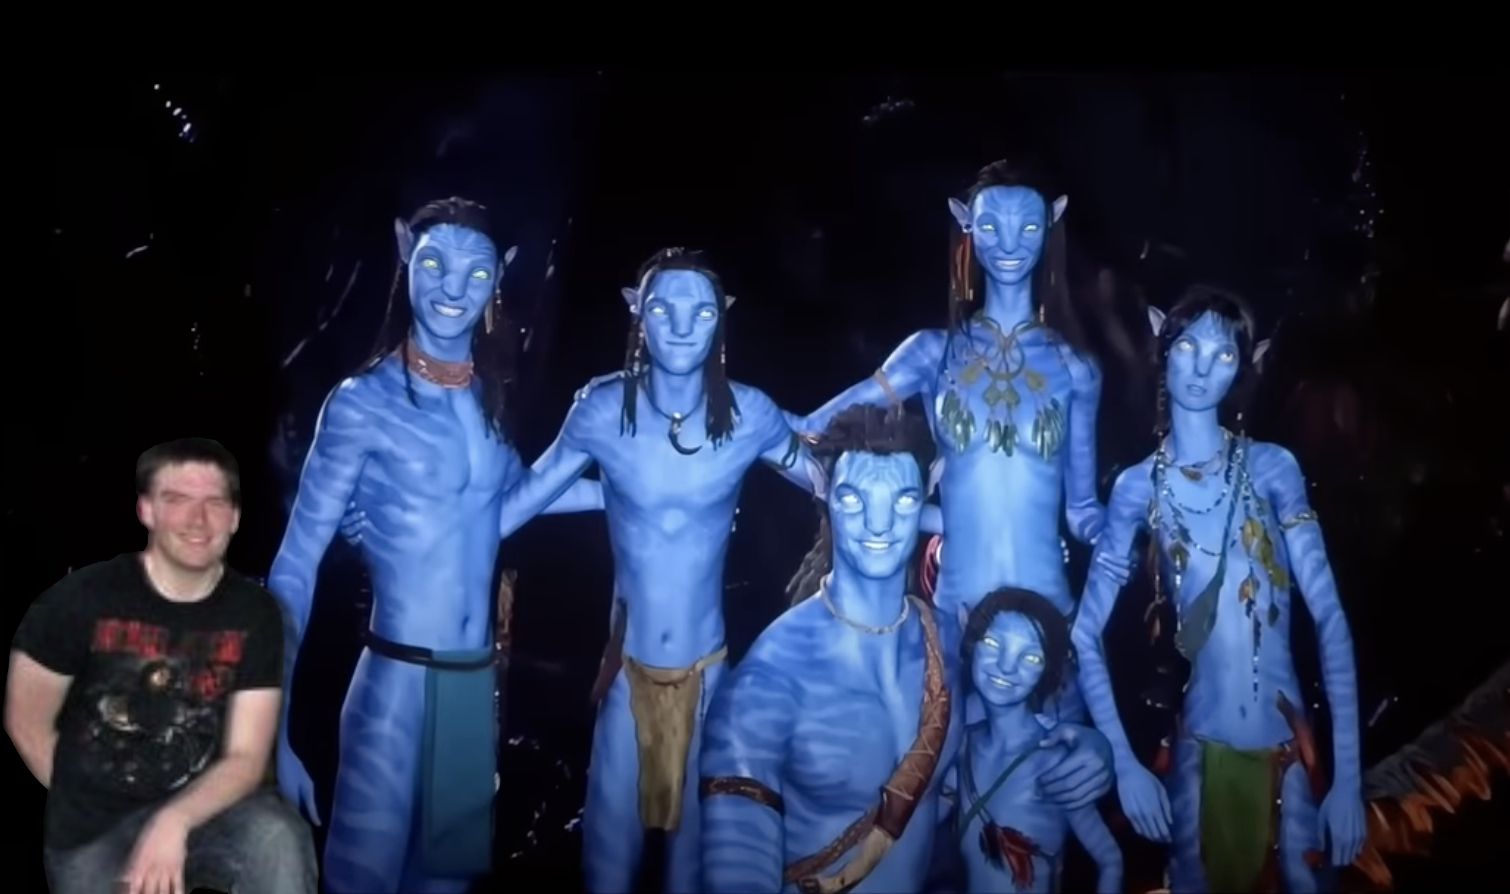 I grew up with blue people